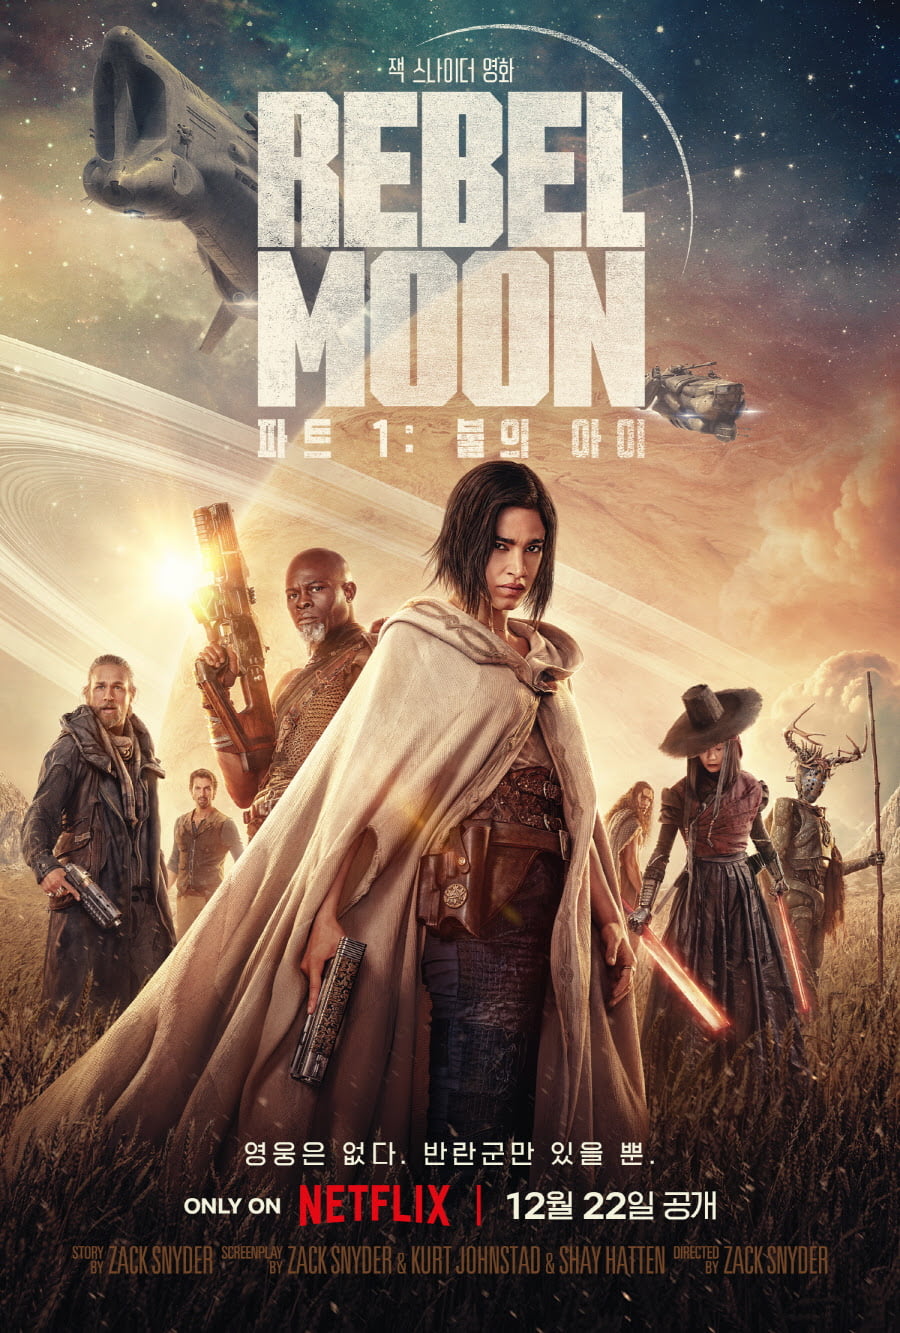 Netflix movie 'Level Moon: Part 1 Child of Fire', a rebellion of those who dream of salvation and revenge